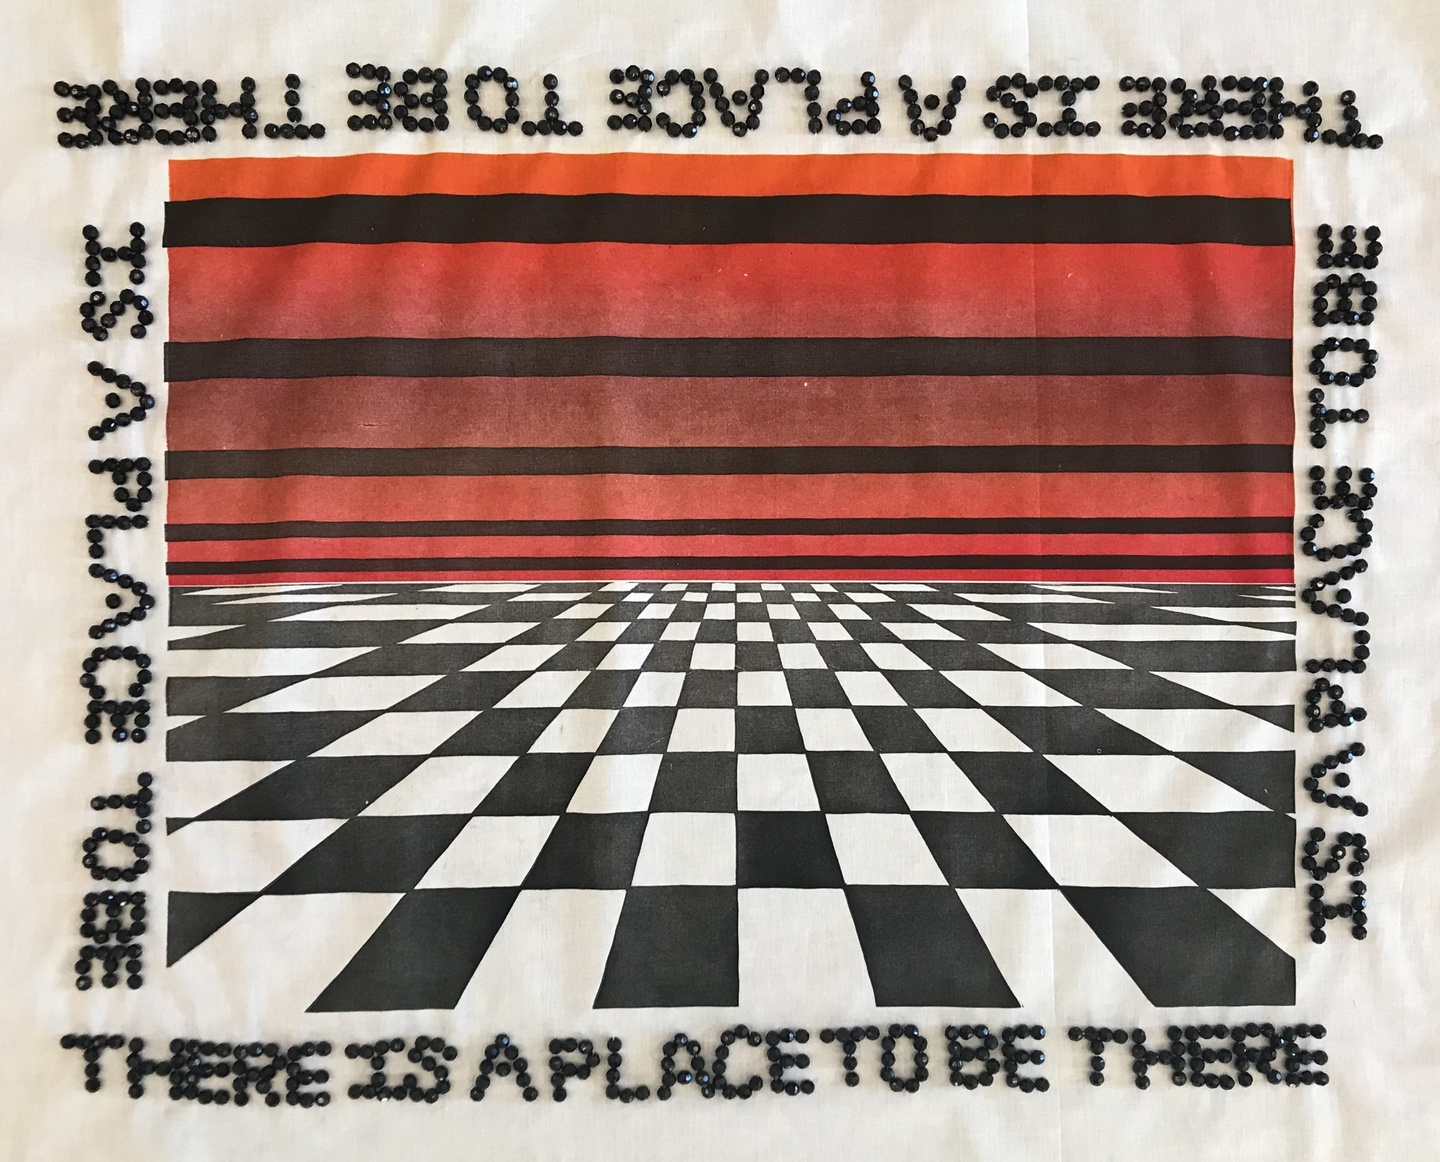 Print on white fabric of a checkerboard floor receding into the distance under a red sky. The words "There is a place to be" are spelled with black beads sewn around the frame of the print, over and over.